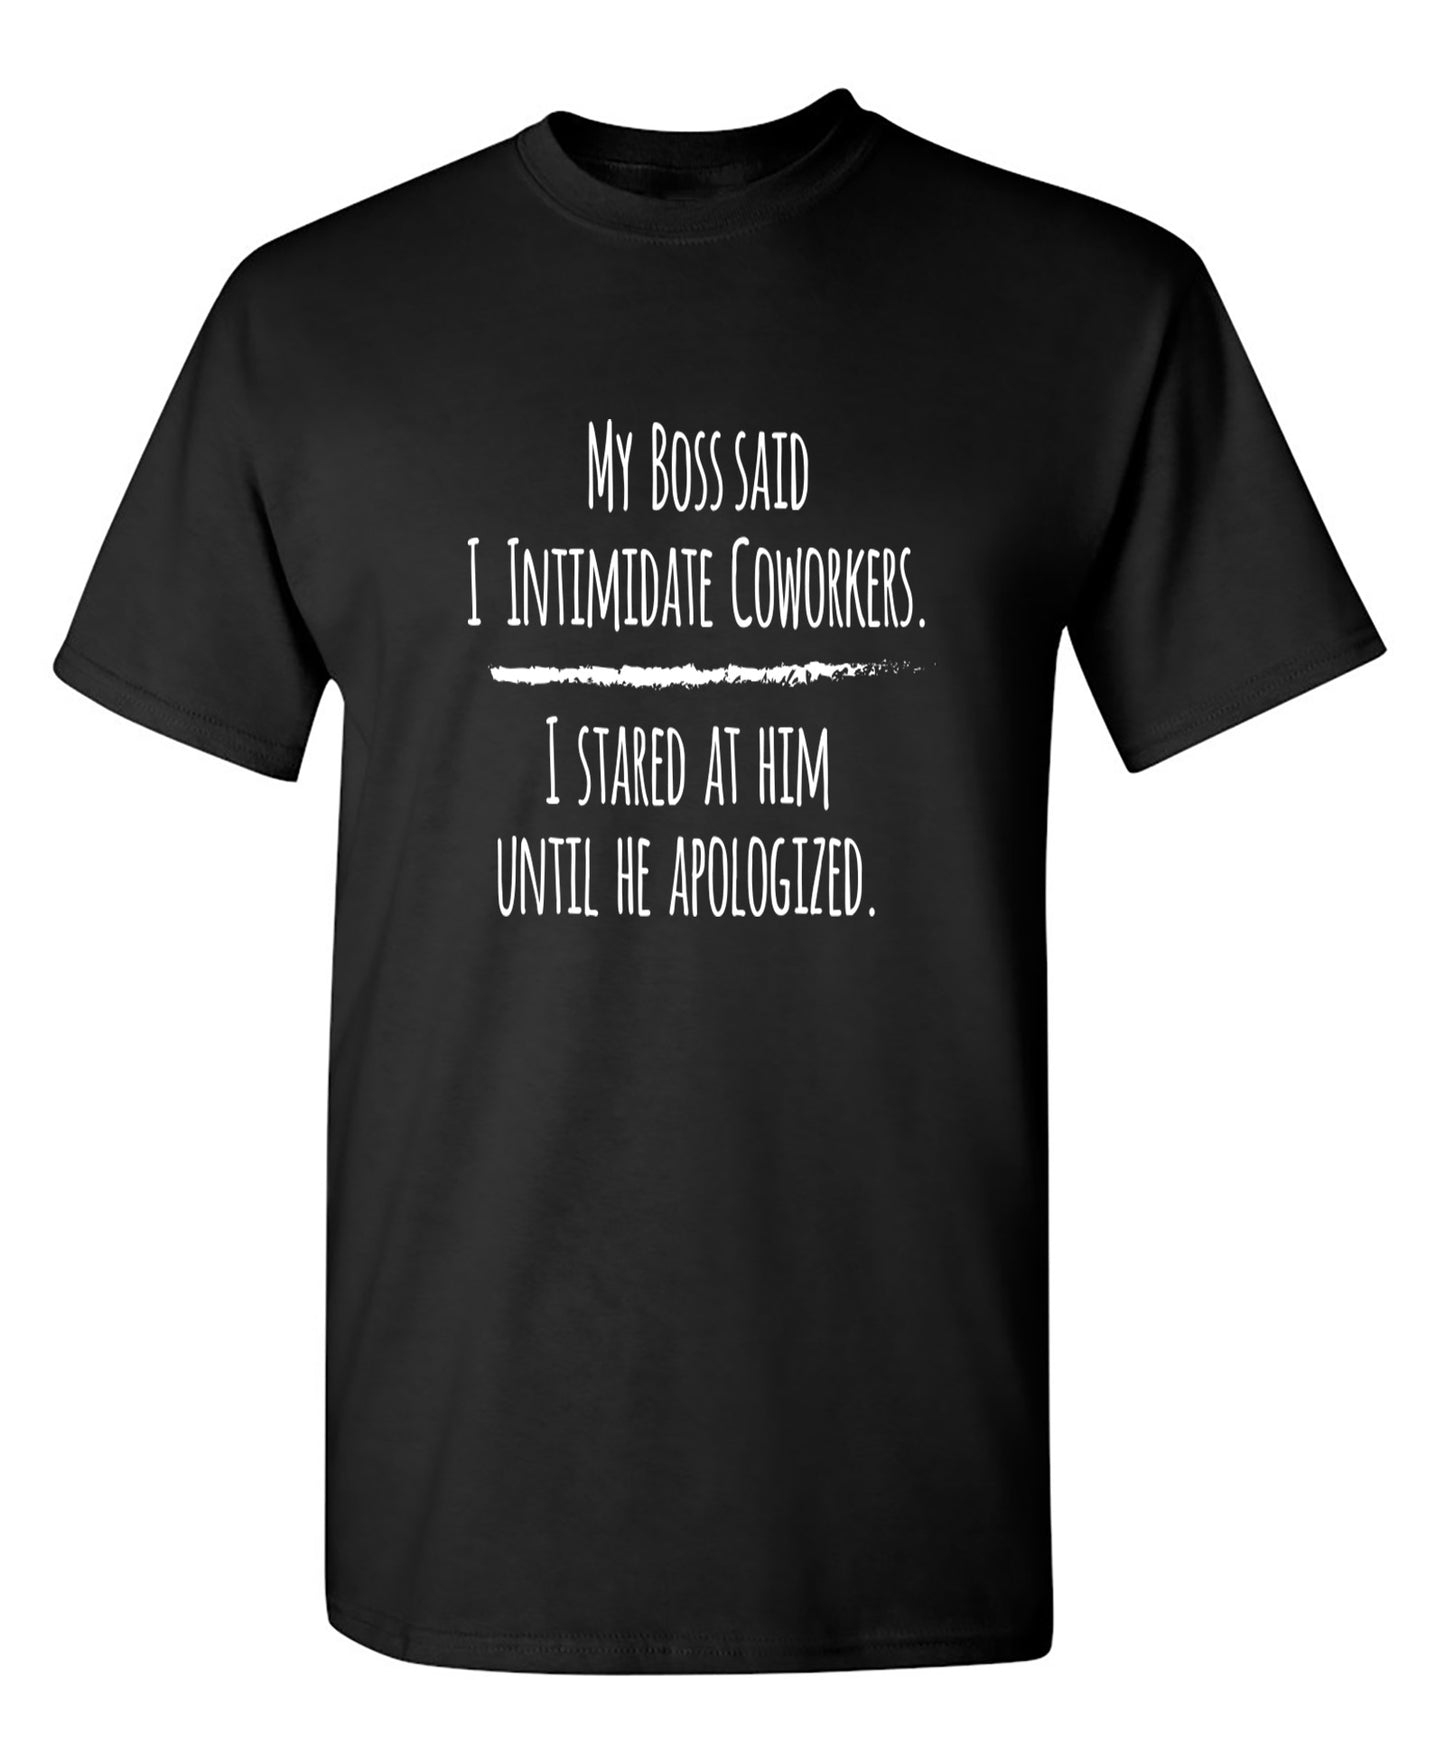 Funny T-Shirts design "My Boss Said I Intimidate Coworkers"